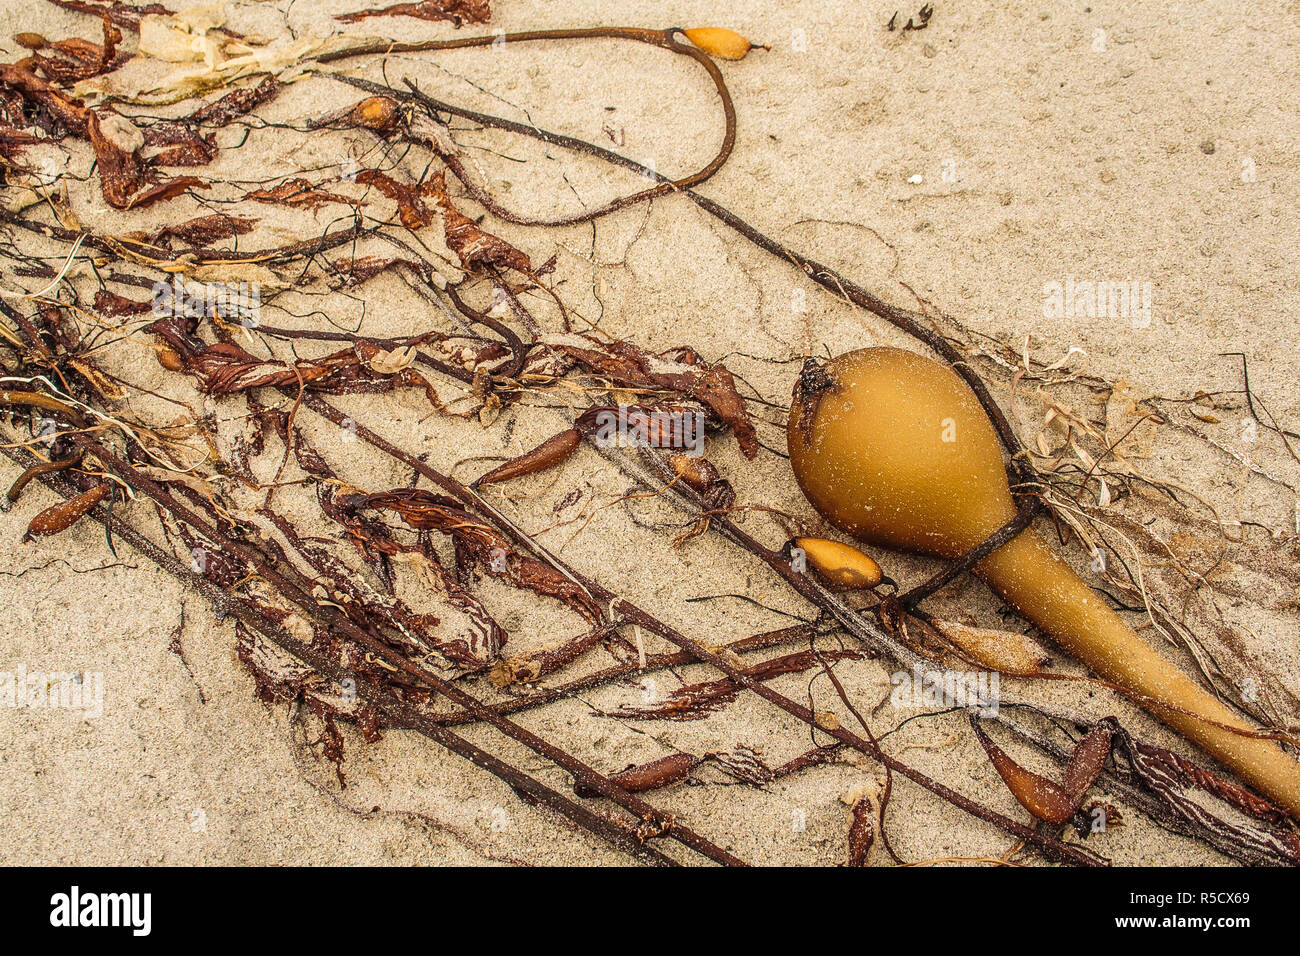 Closeup of one large and many smaller brown kelp bladders and strands of seaweed, washed up on a sandy beach in diagonal lines across the image. Stock Photo